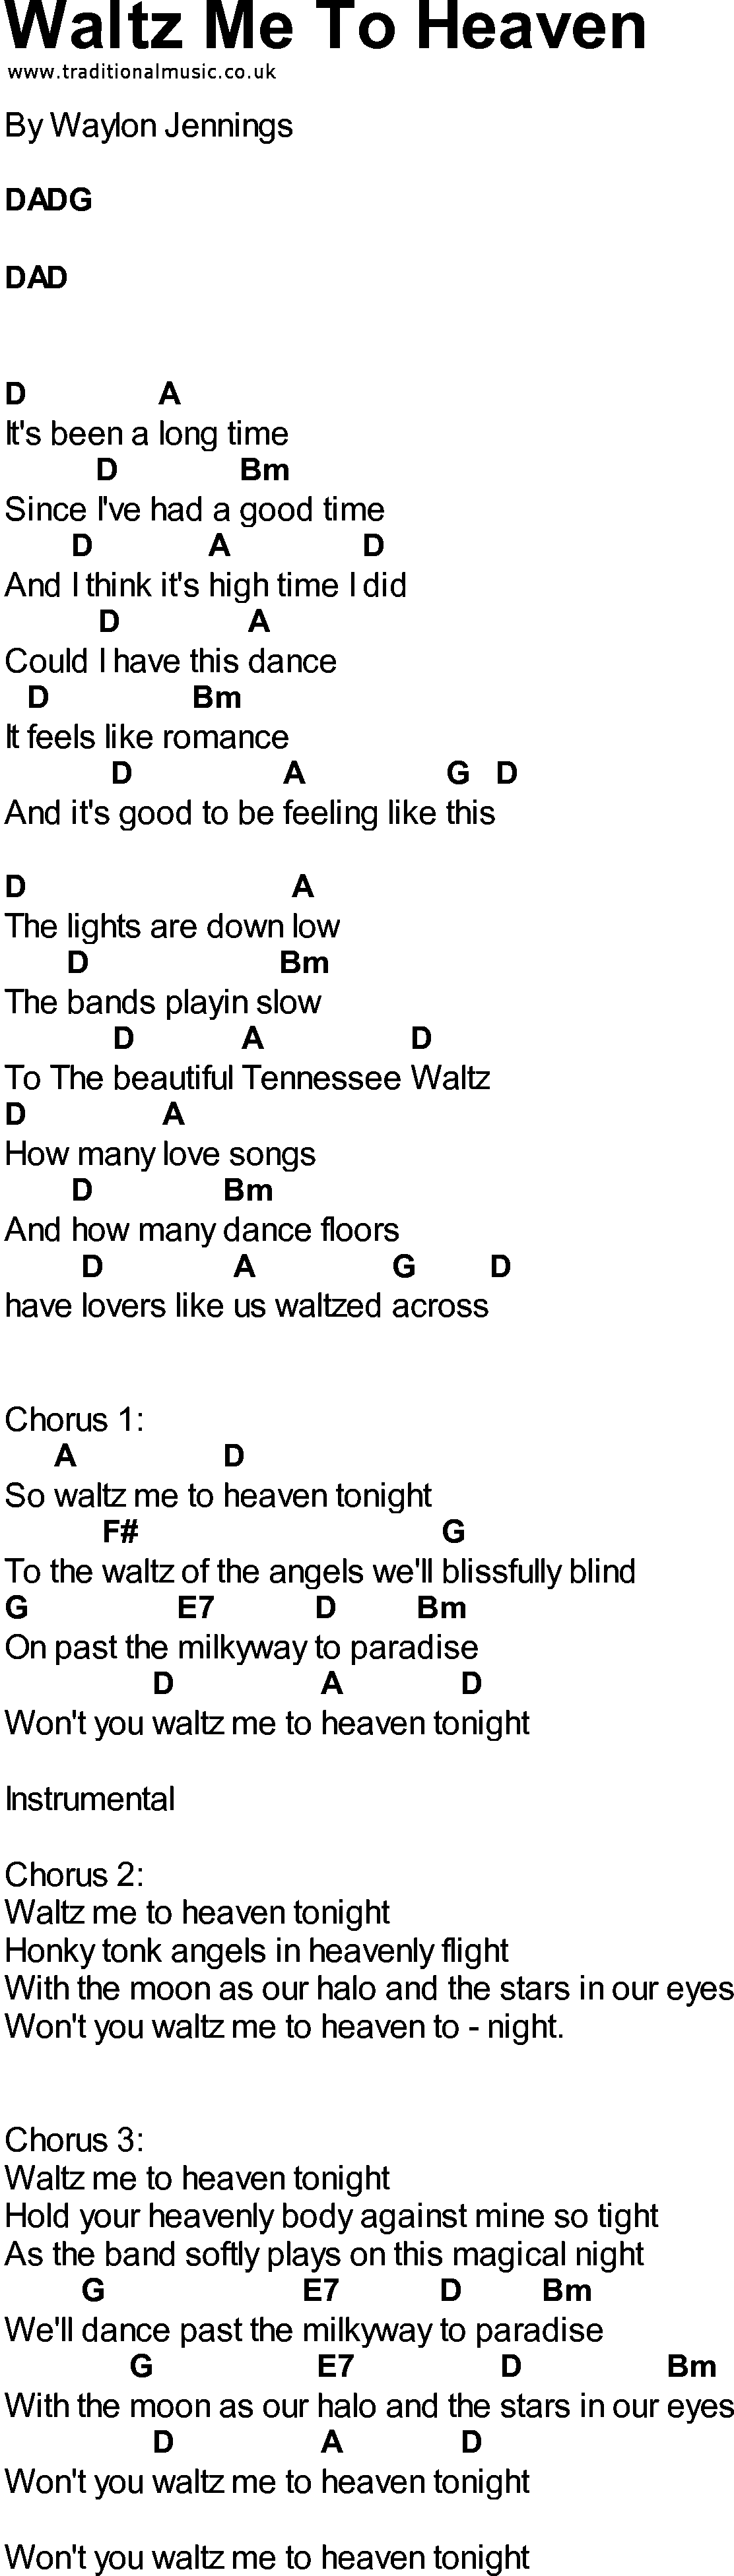 Bluegrass songs with chords - Waltz Me To Heaven